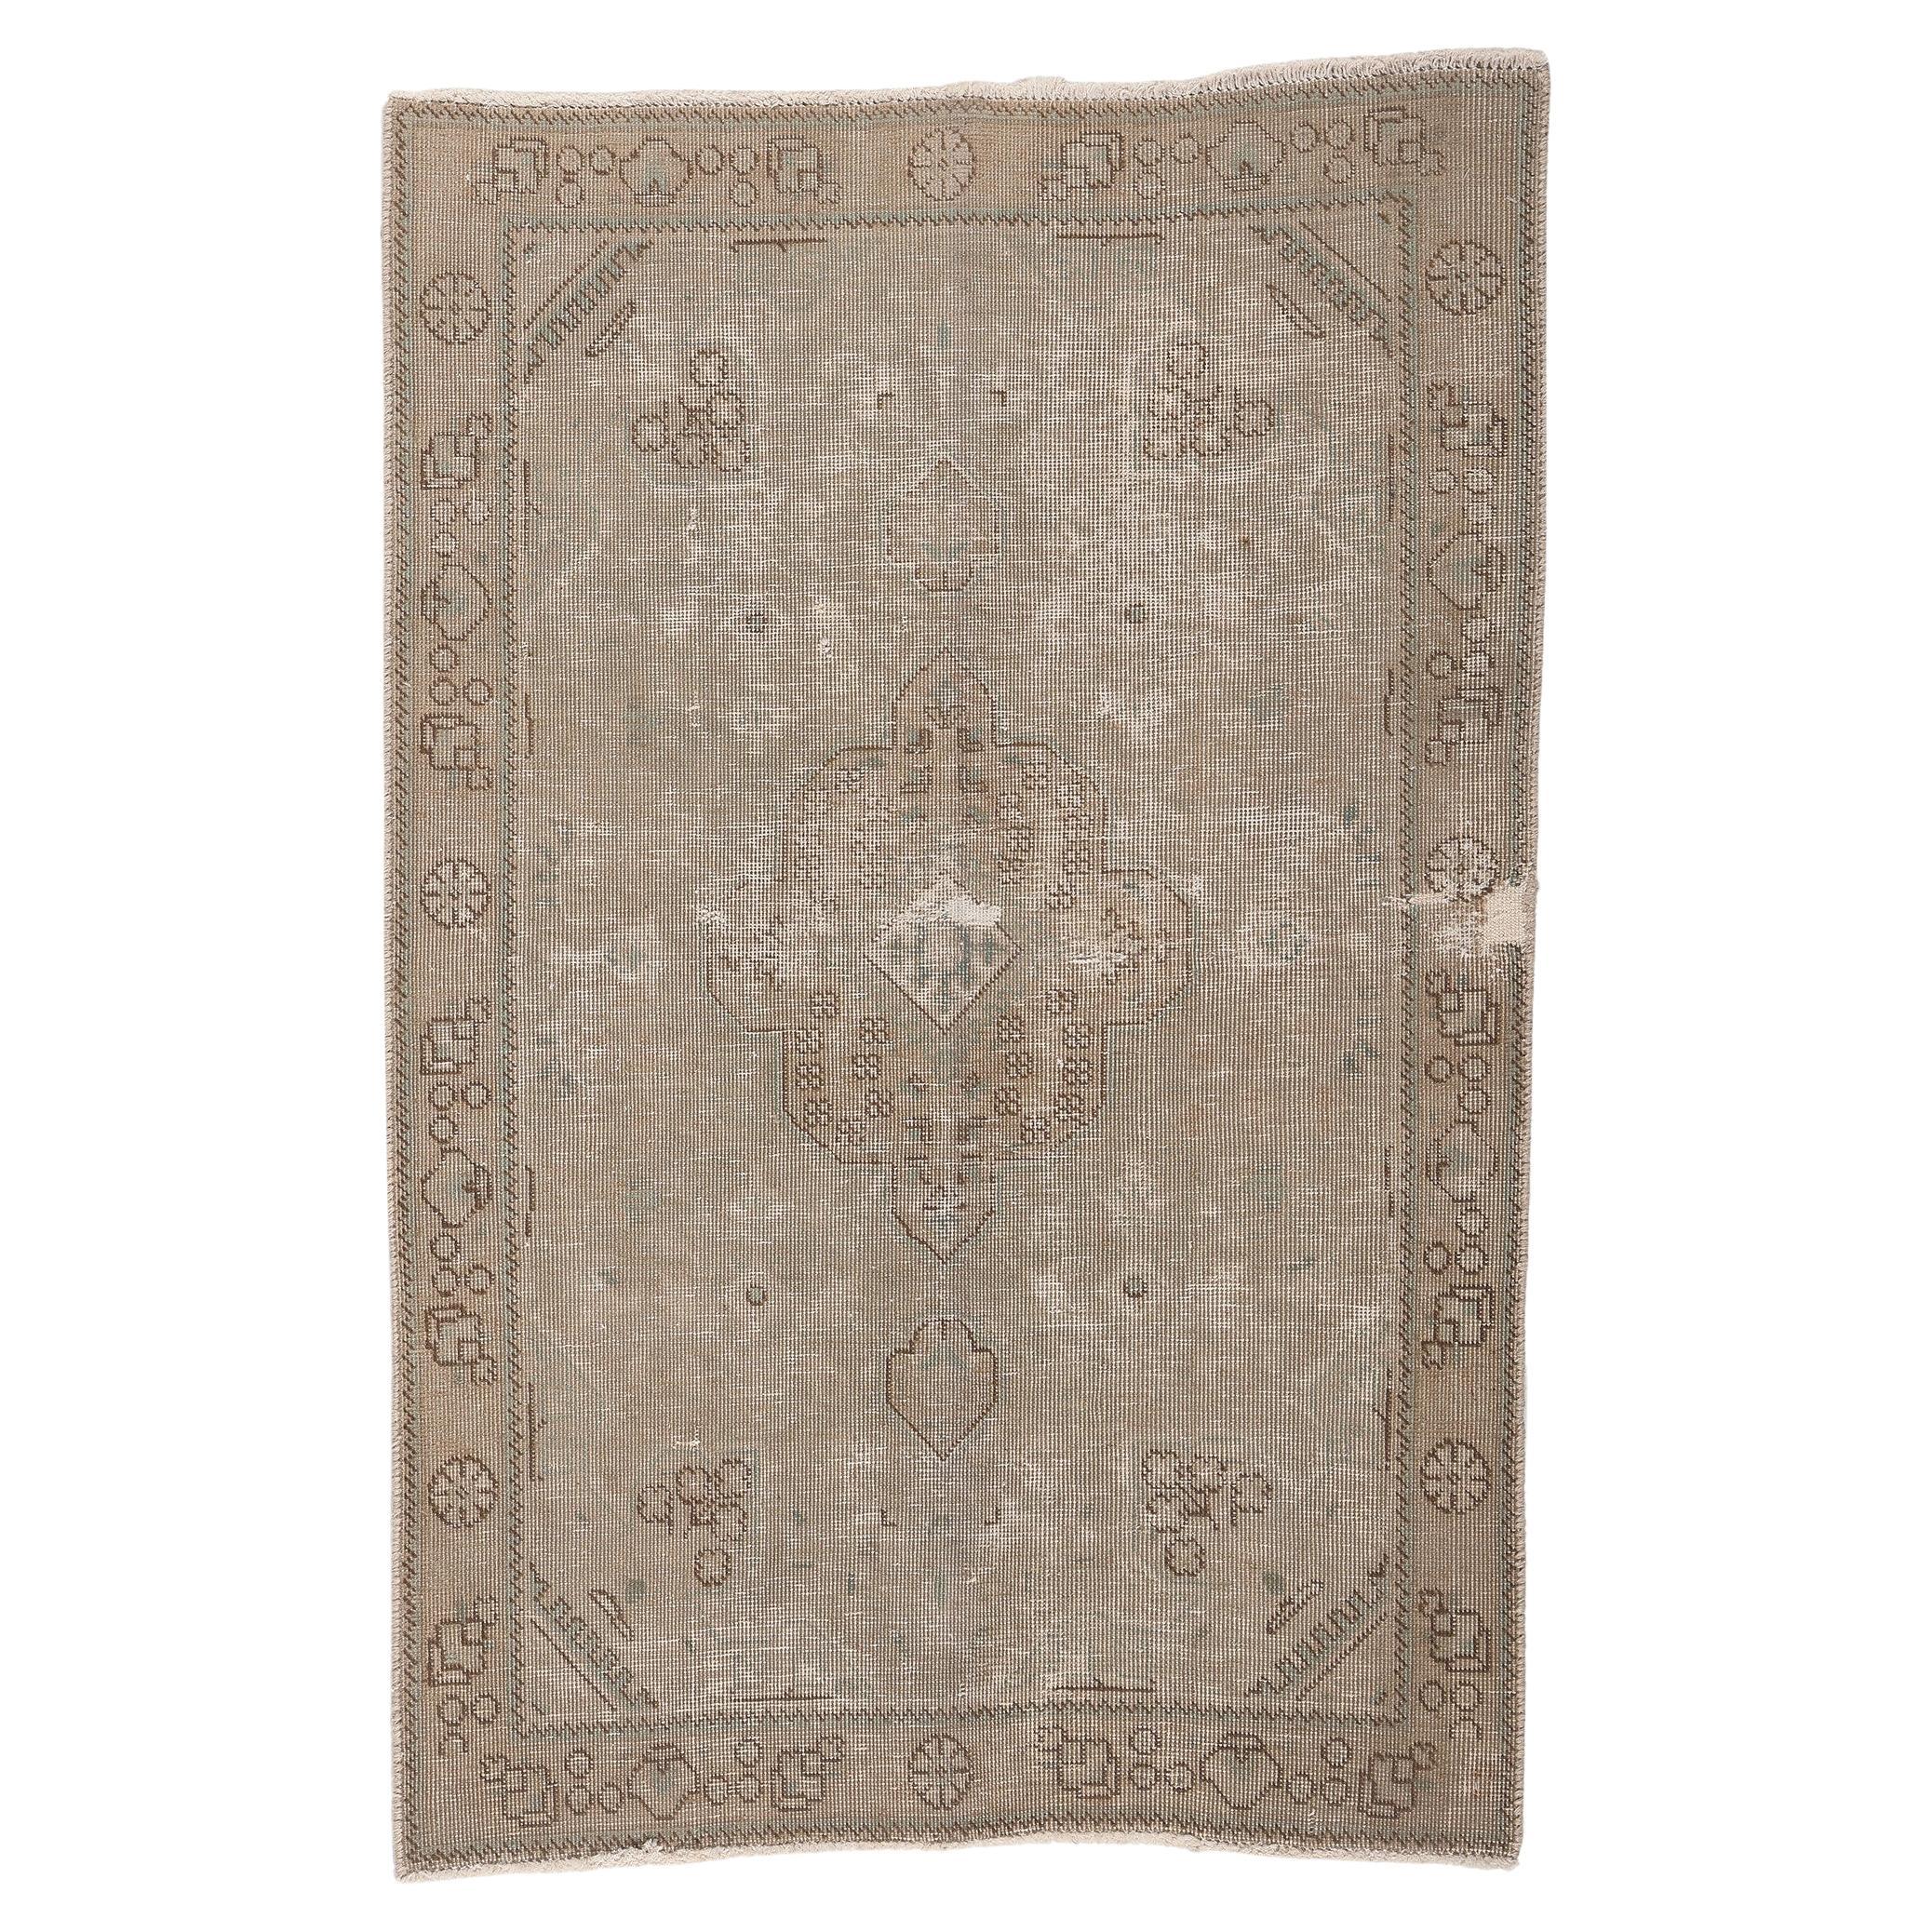 Distressed Faded Vintage Persian Rug, Earth-Tone Elegance Meets Modern Luxe